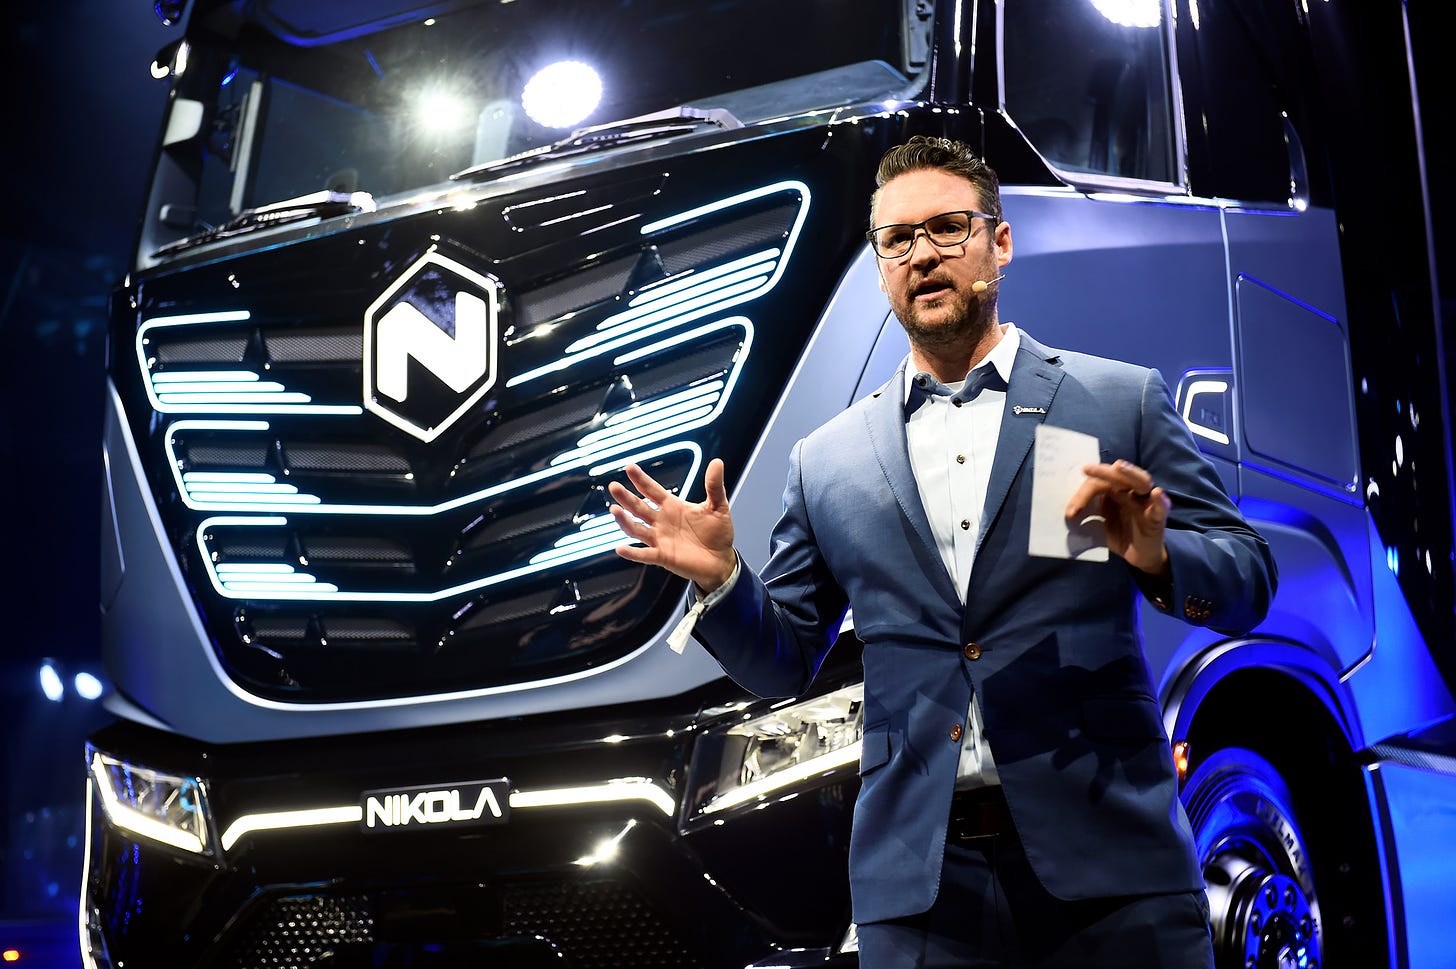 Trevor Milton, founder and public face of Nikola, steps down amid  accusations of fraud